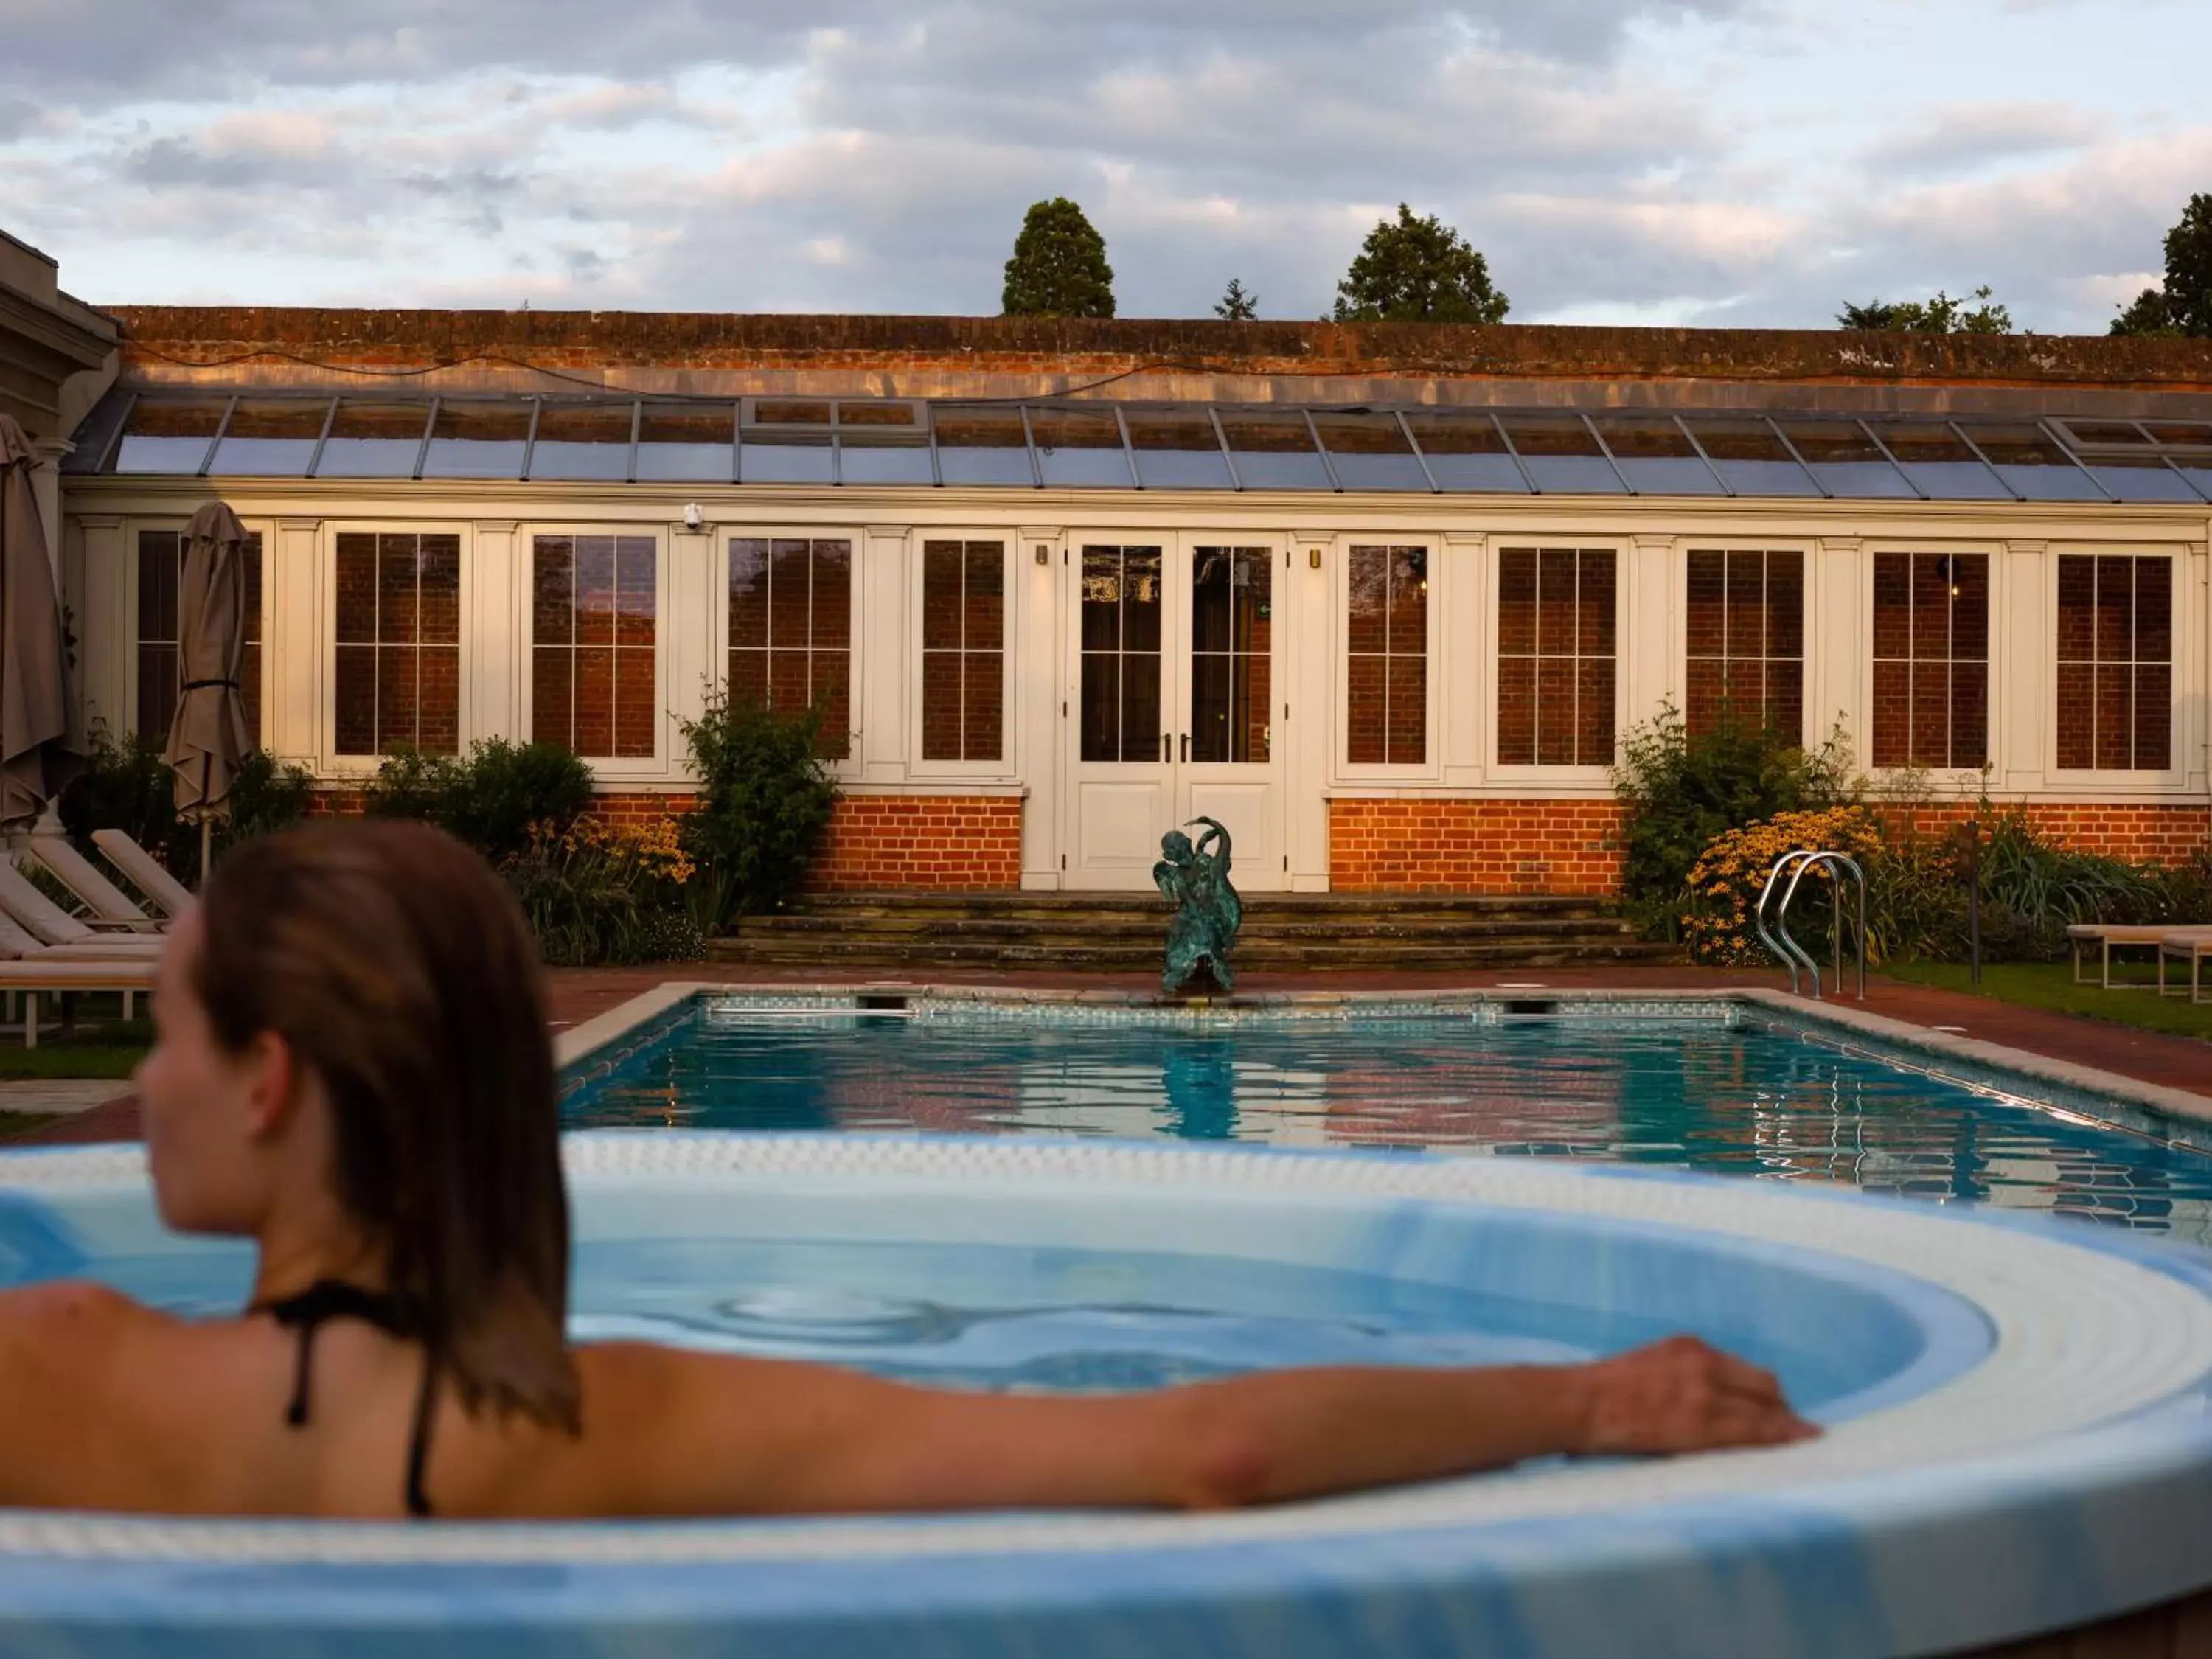 Swimming Pool in Cliveden House - an Iconic Luxury Hotel